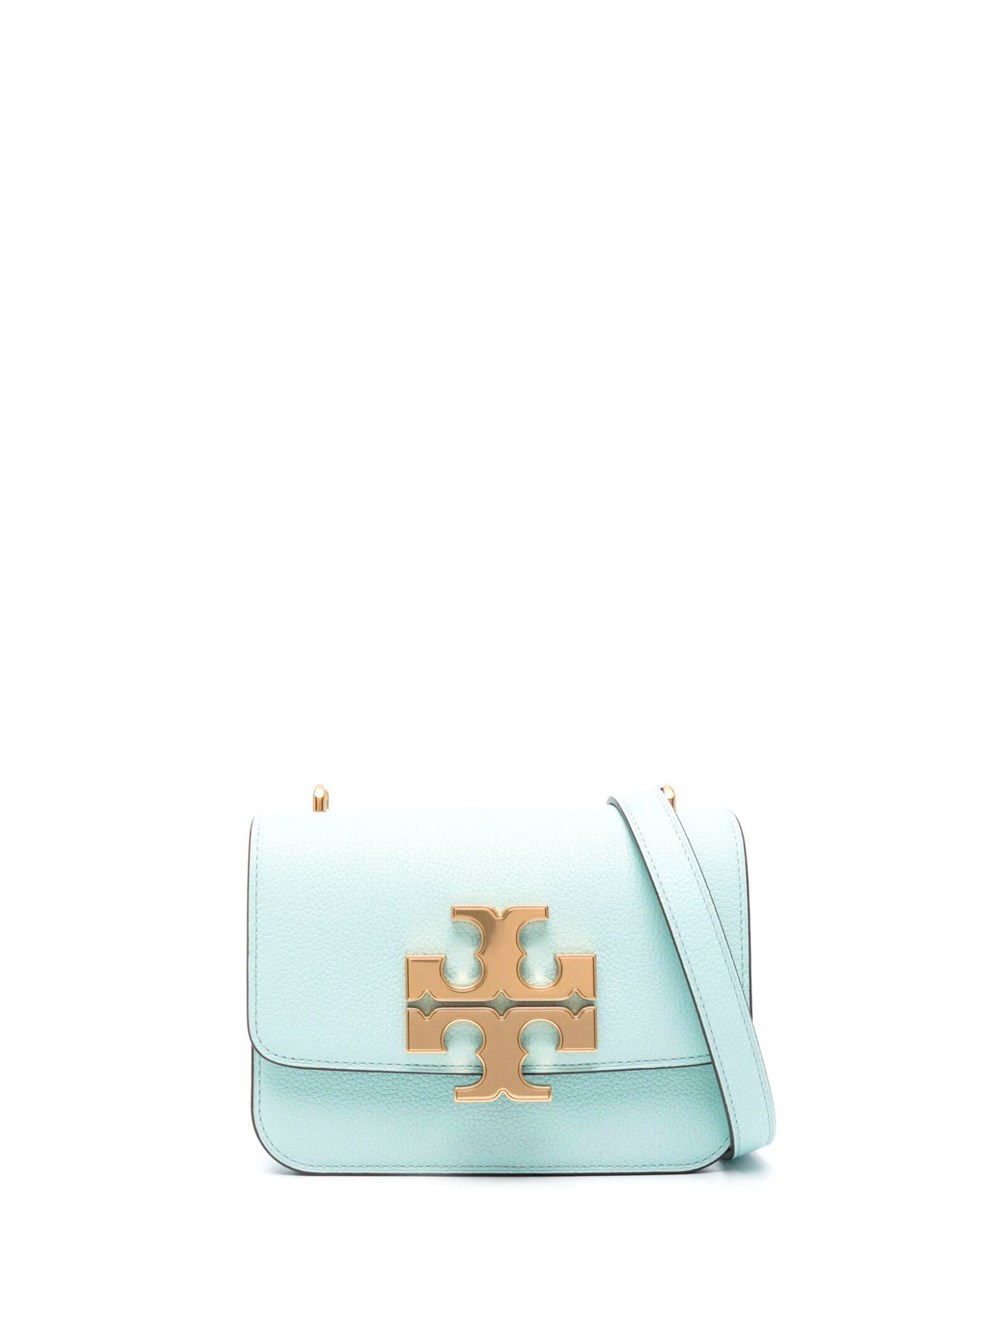 Shop Tory Burch `eleanor Pebbled` Small Convertible Shoulder Bag In Blue